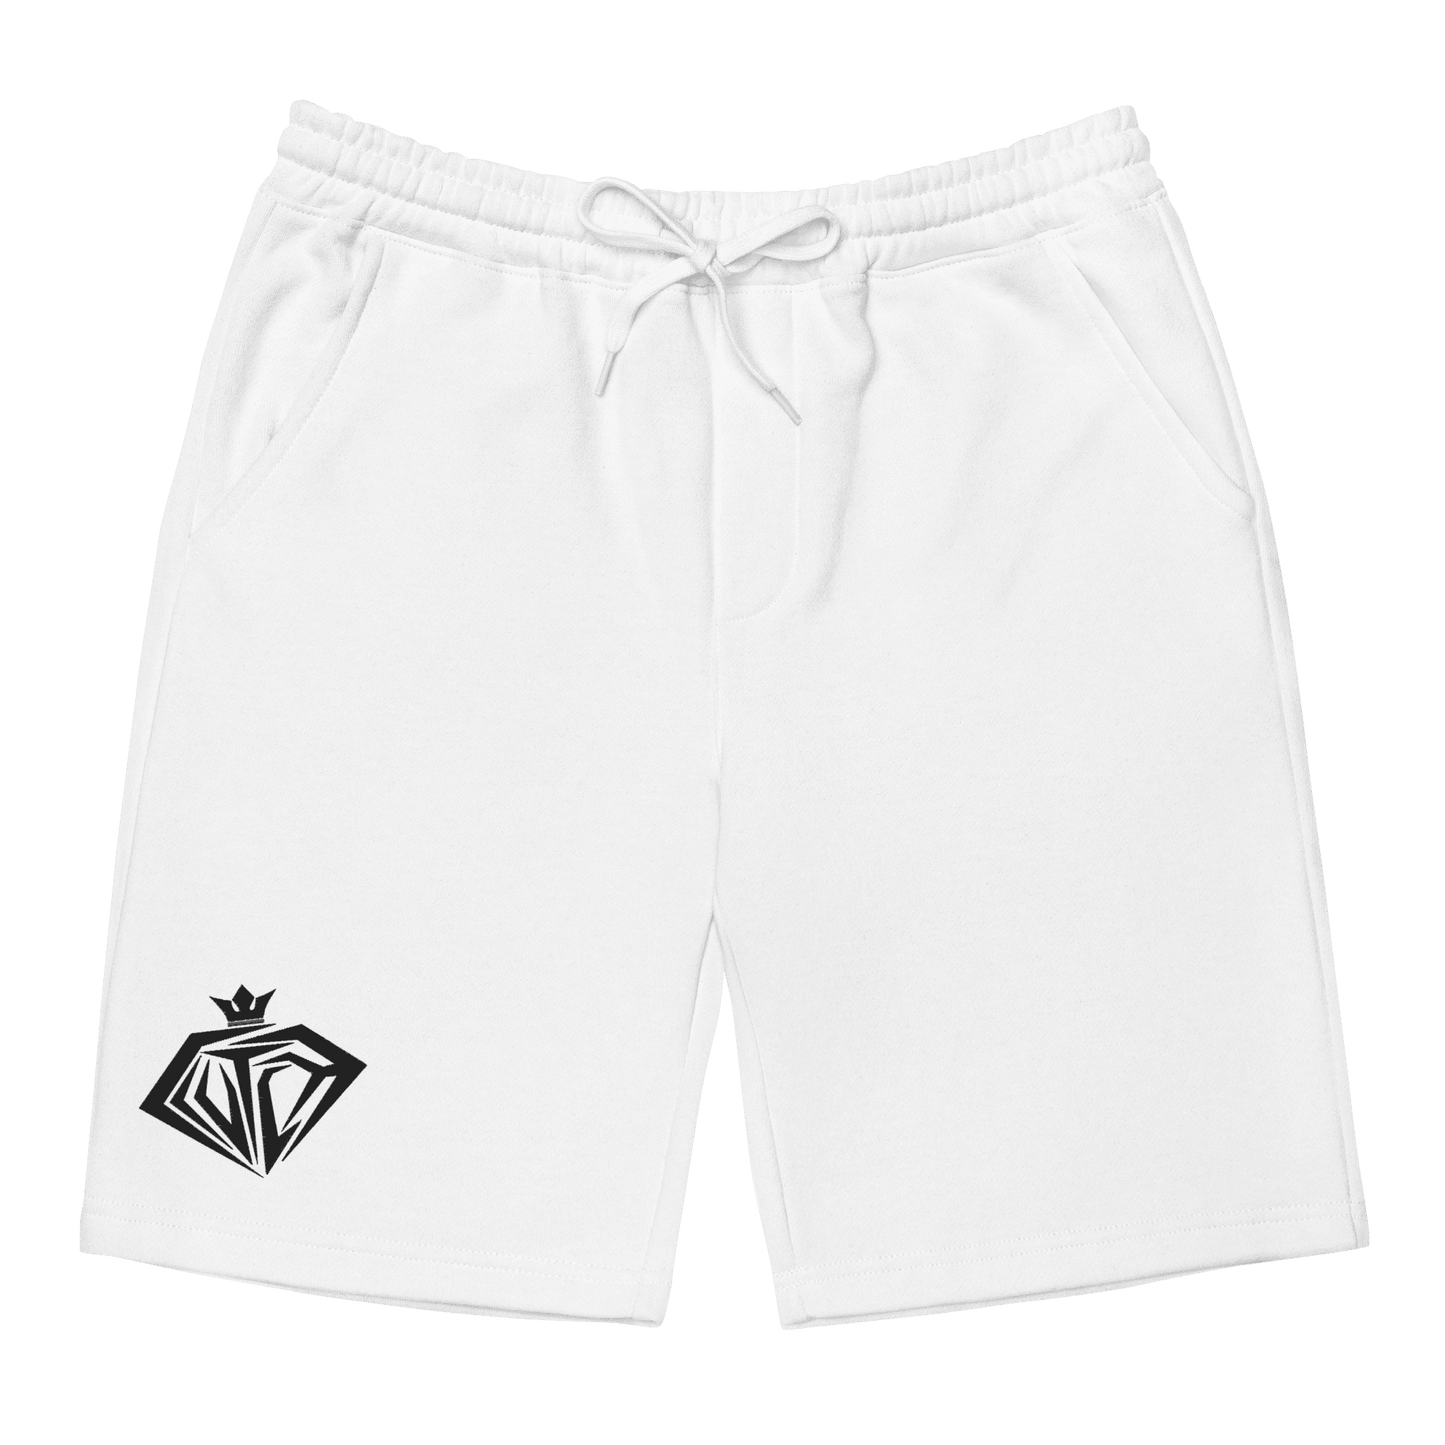 Embroidered Fleece Shorts - Clutch - Clothing